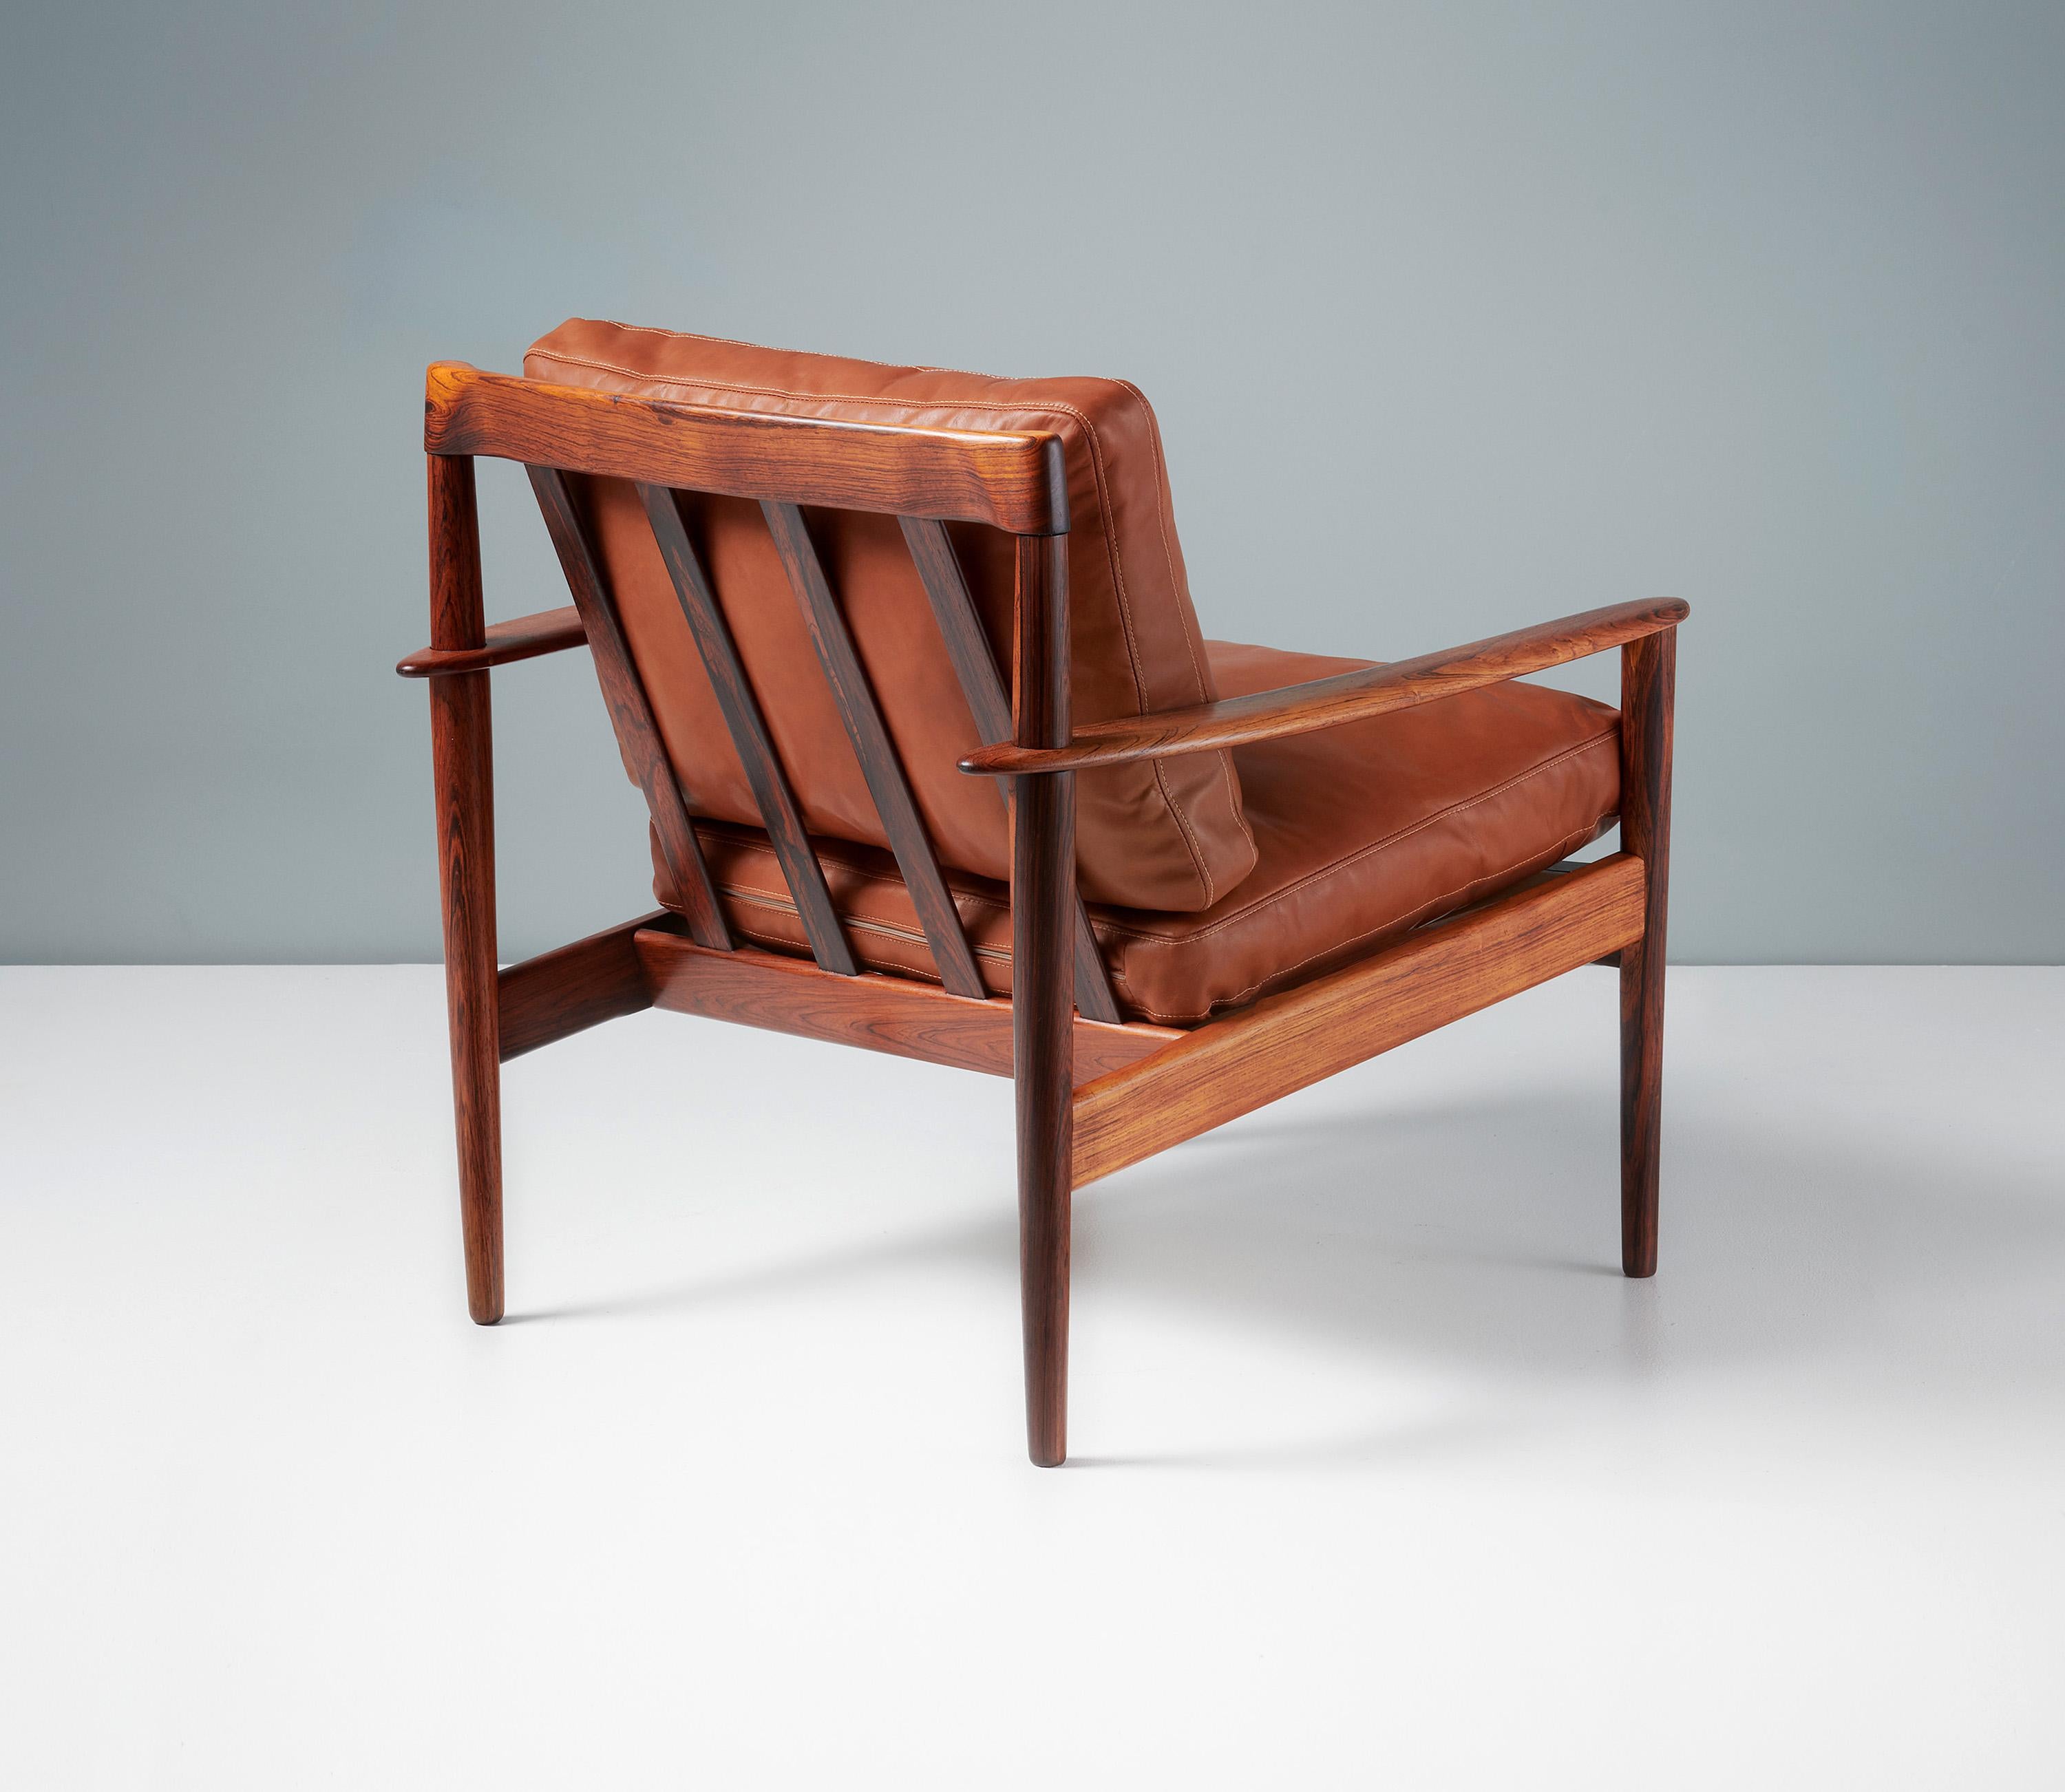 Grete Jalk Model PJ-56 lounge chair

A beautiful lounge chair designed by Grete Jalk for cabinetmaker Poul Jeppesen in Denmark, circa 1956. This examples come in stunning rosewood with a particularly unusual, exotic grain. The chair comes with